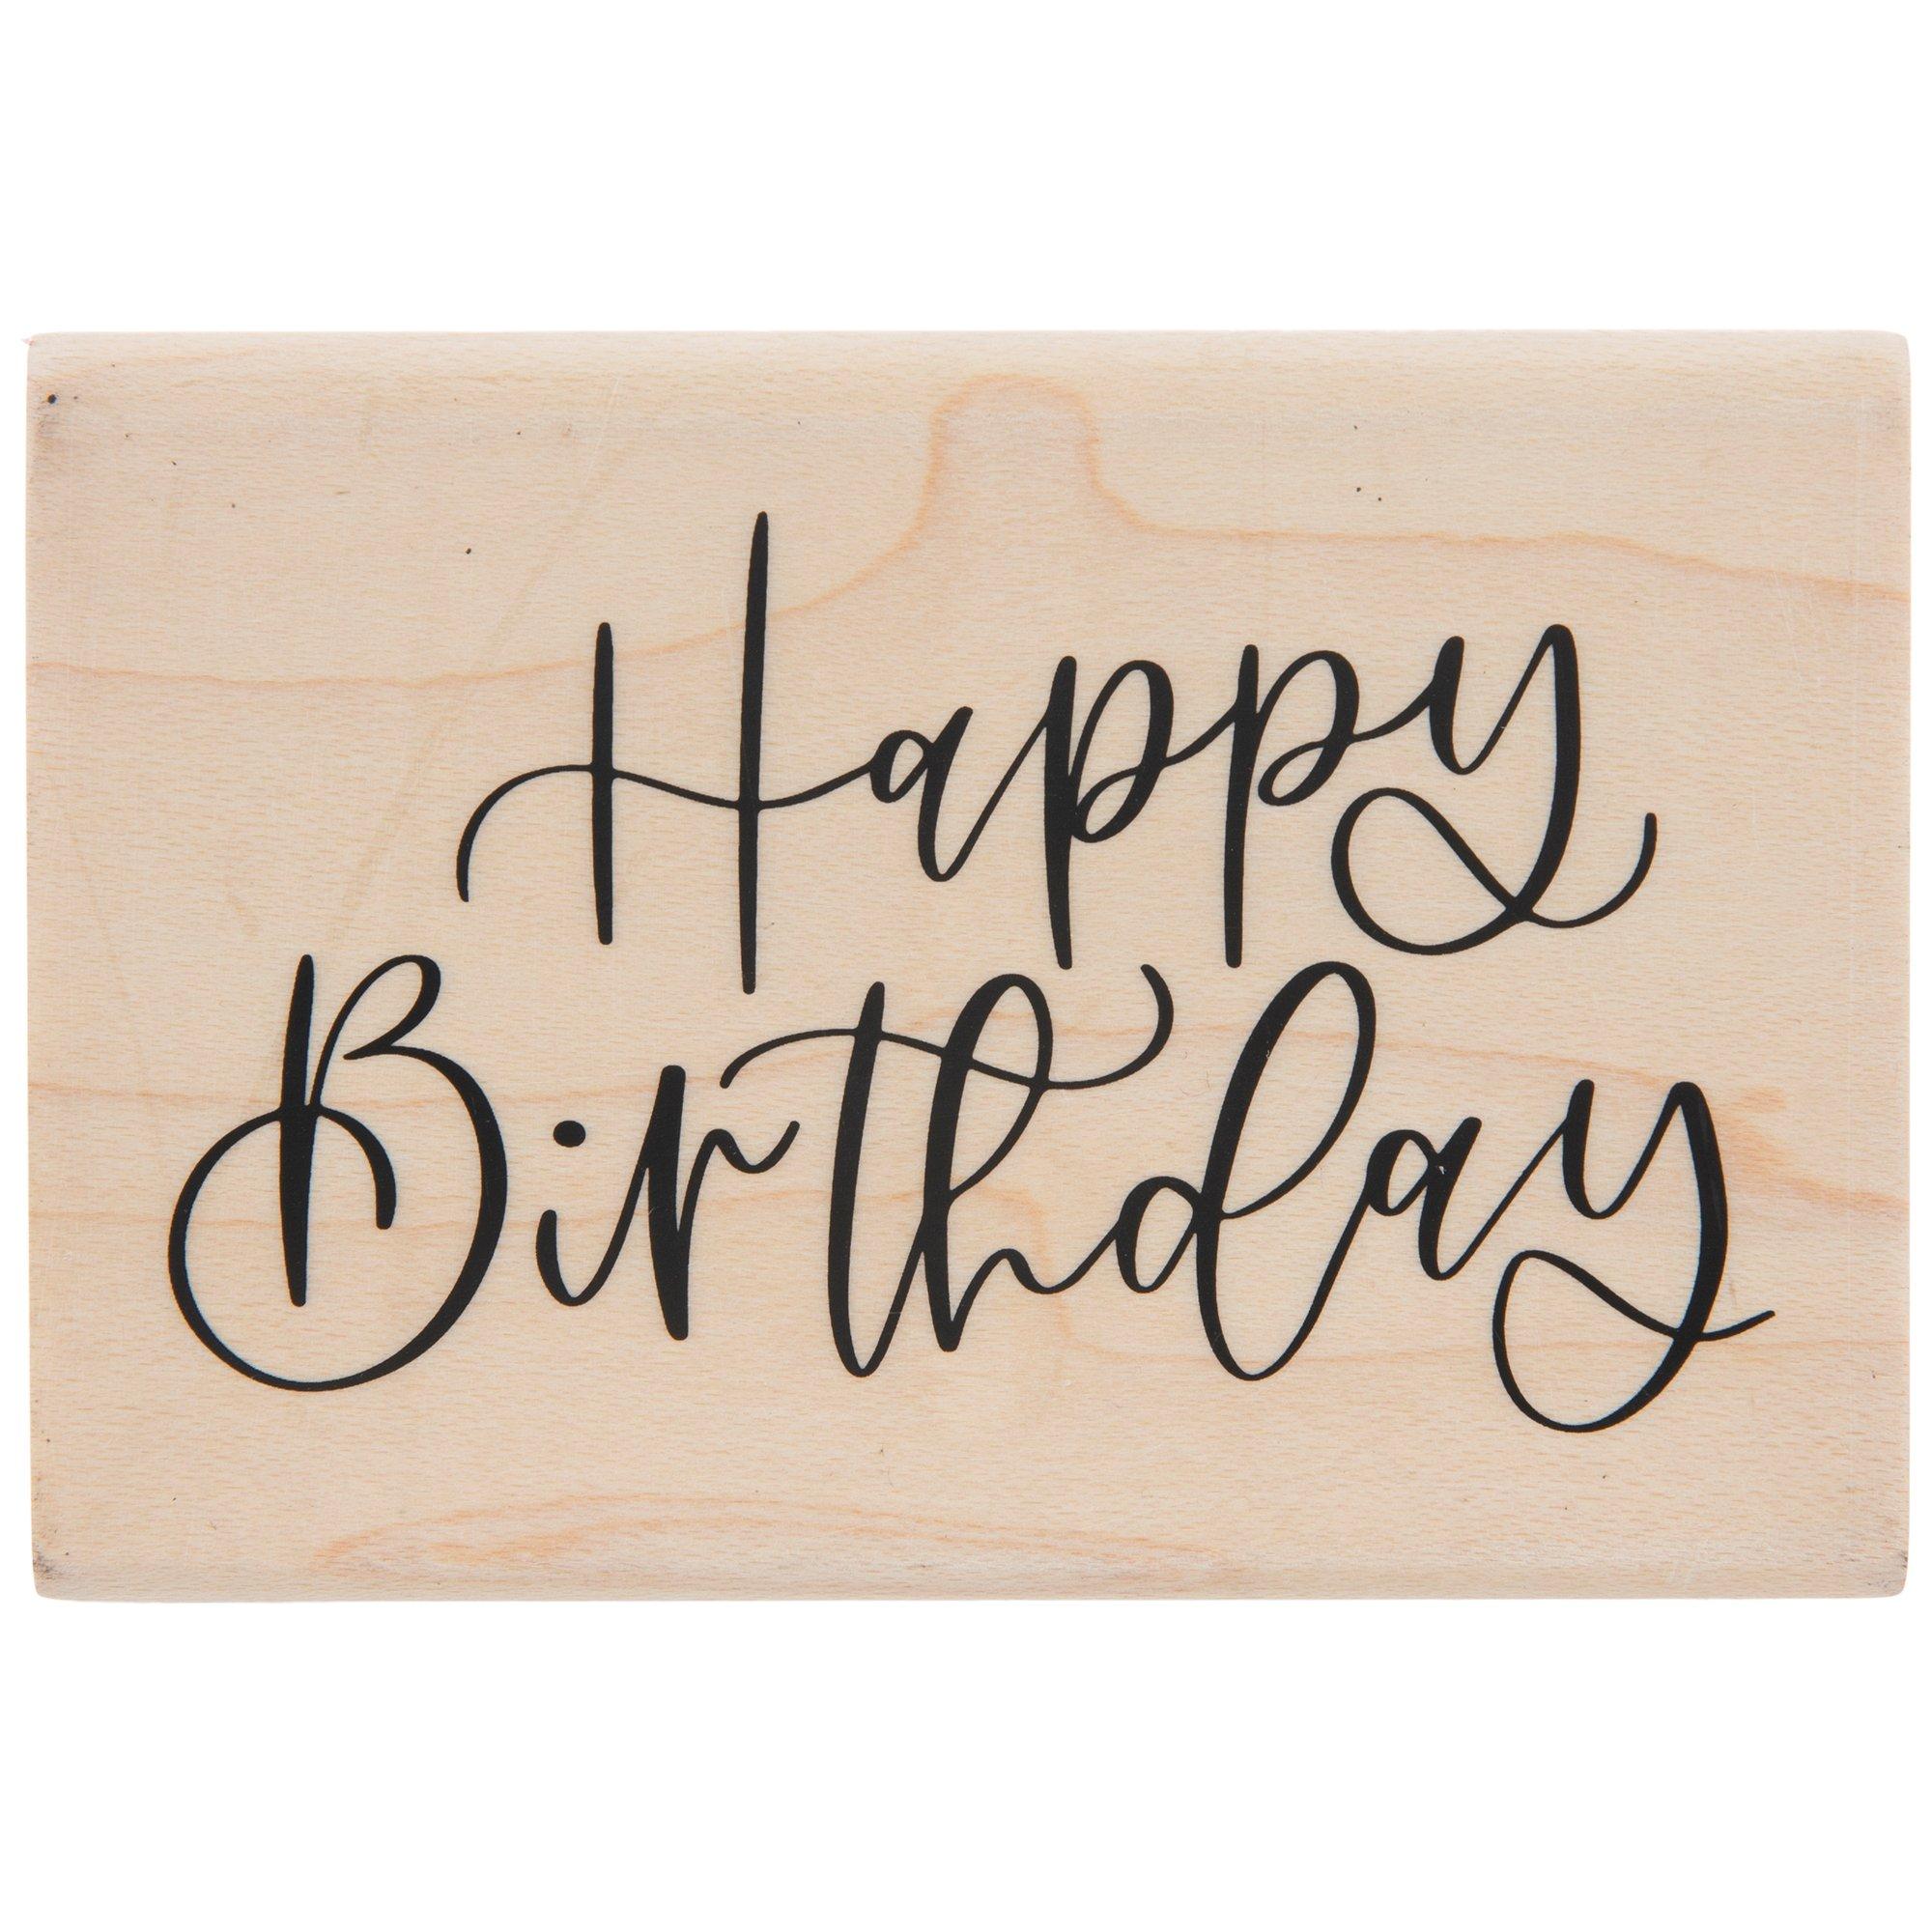 Small Script Happy Birthday Rubber Stamp by DRS Designs Rubber Stamps